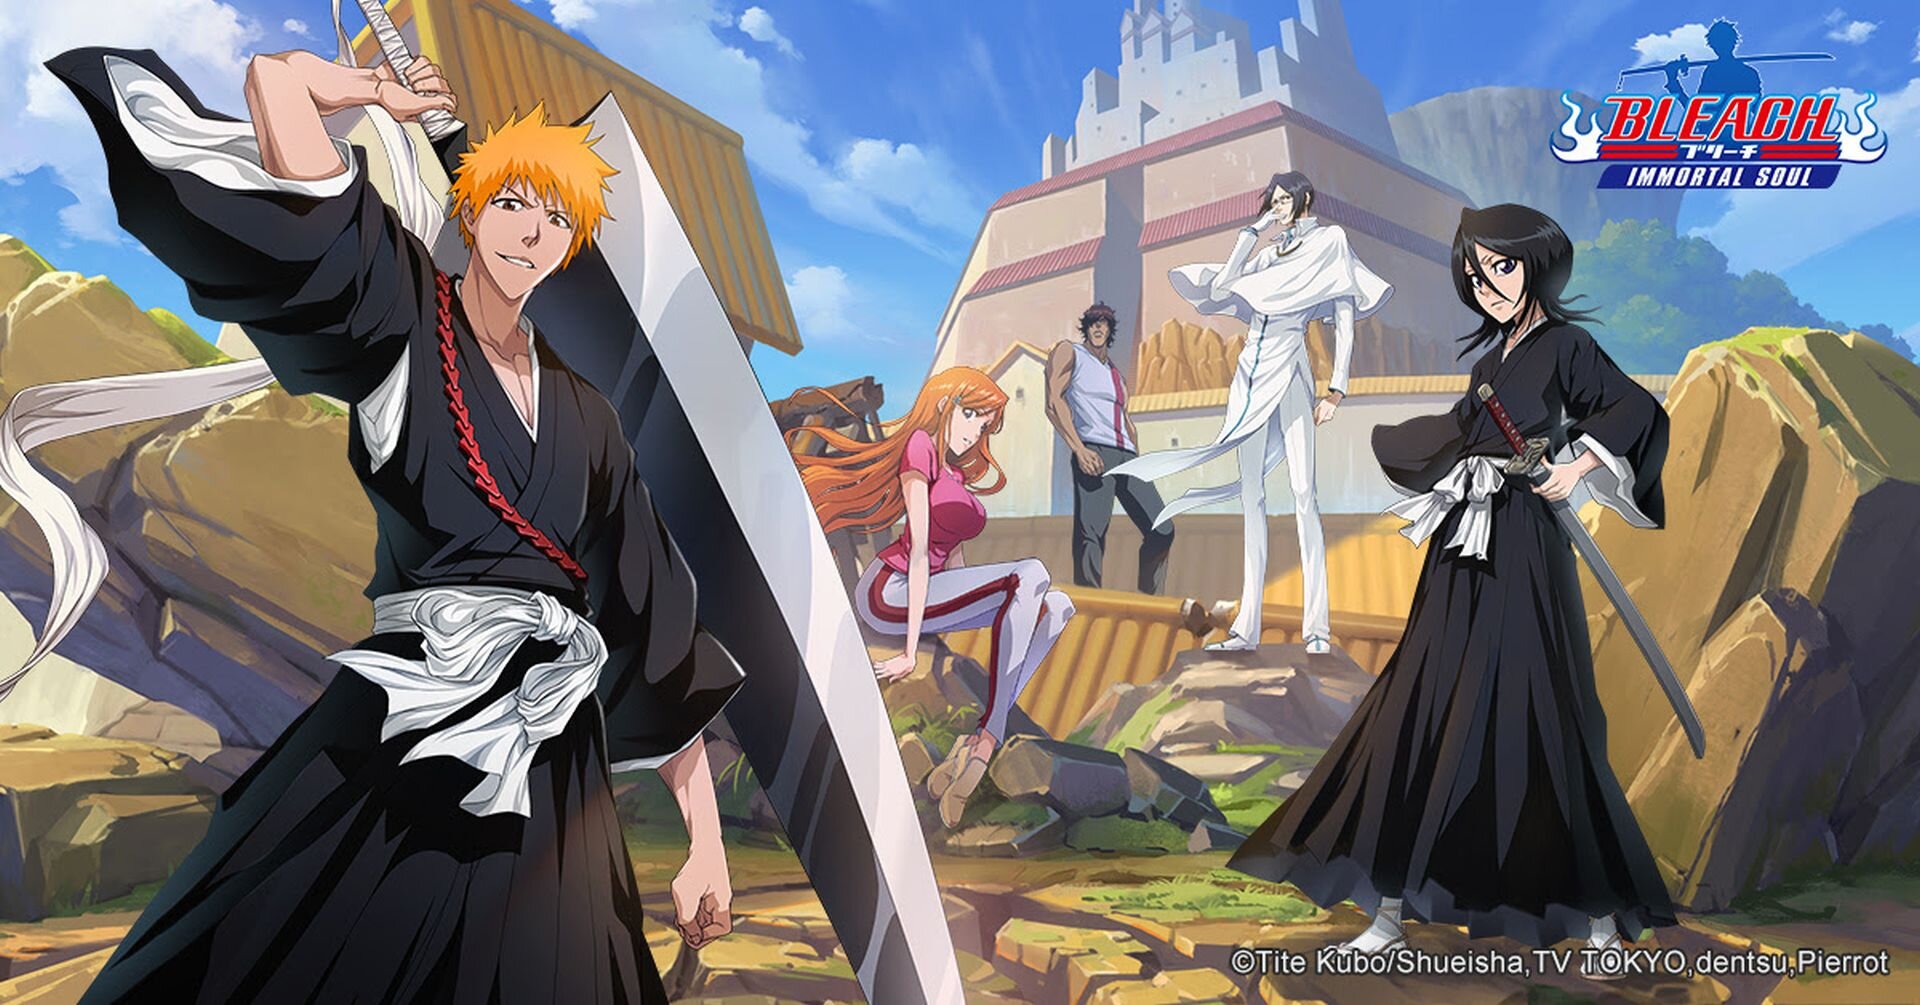 Anime gets yet another quality game with Bleach: Soul Liberation